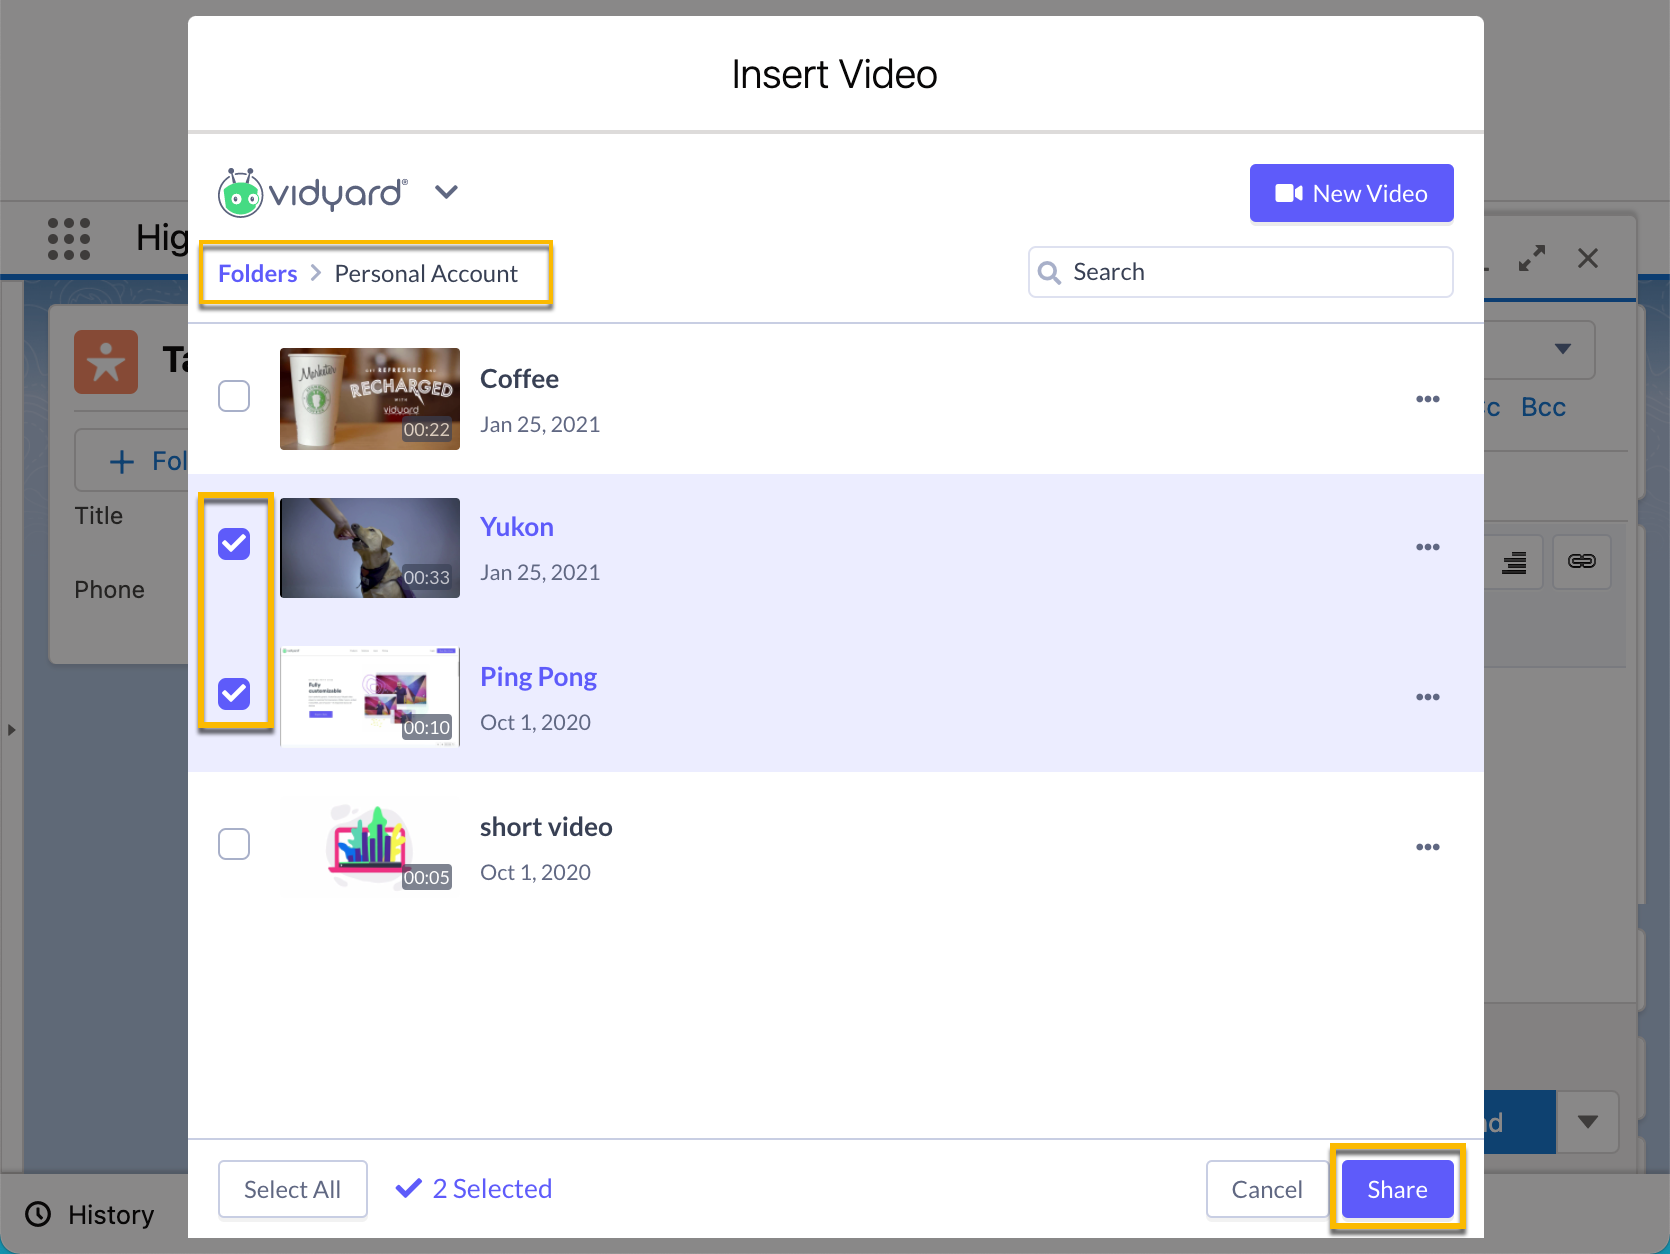 Selecting videos from your video library to share in an email